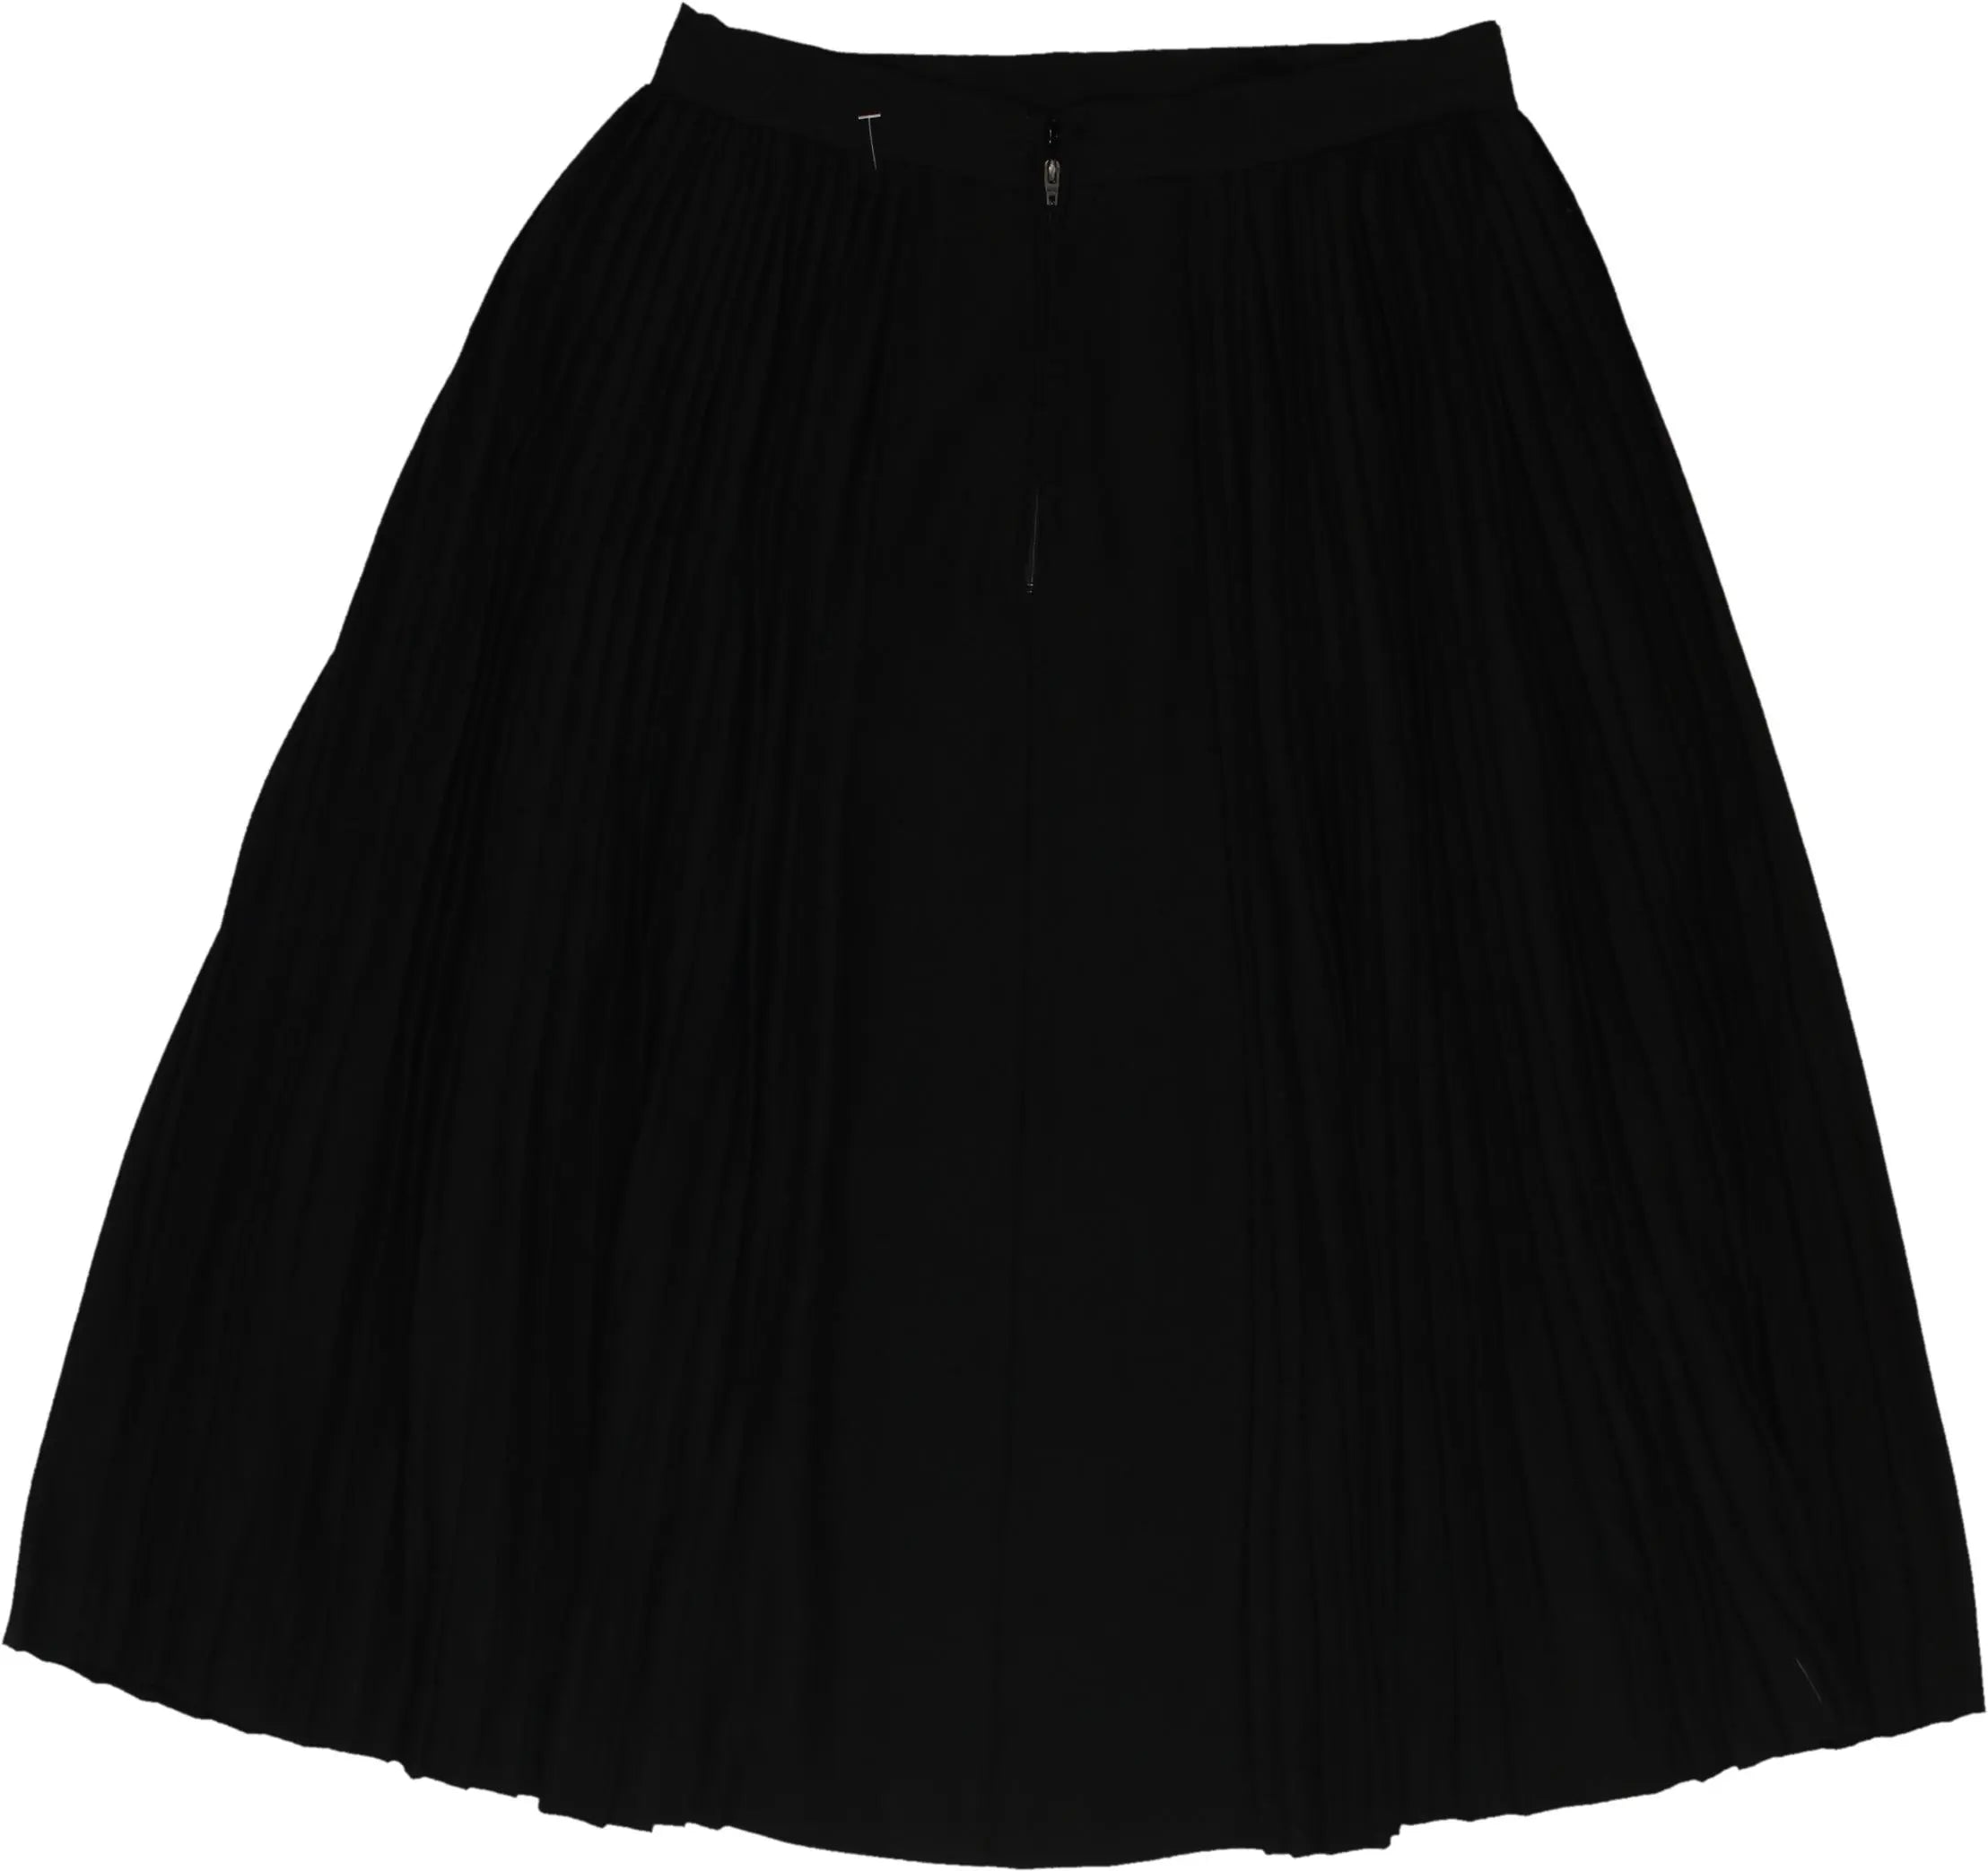 Unknown - Black pleated skirt- ThriftTale.com - Vintage and second handclothing